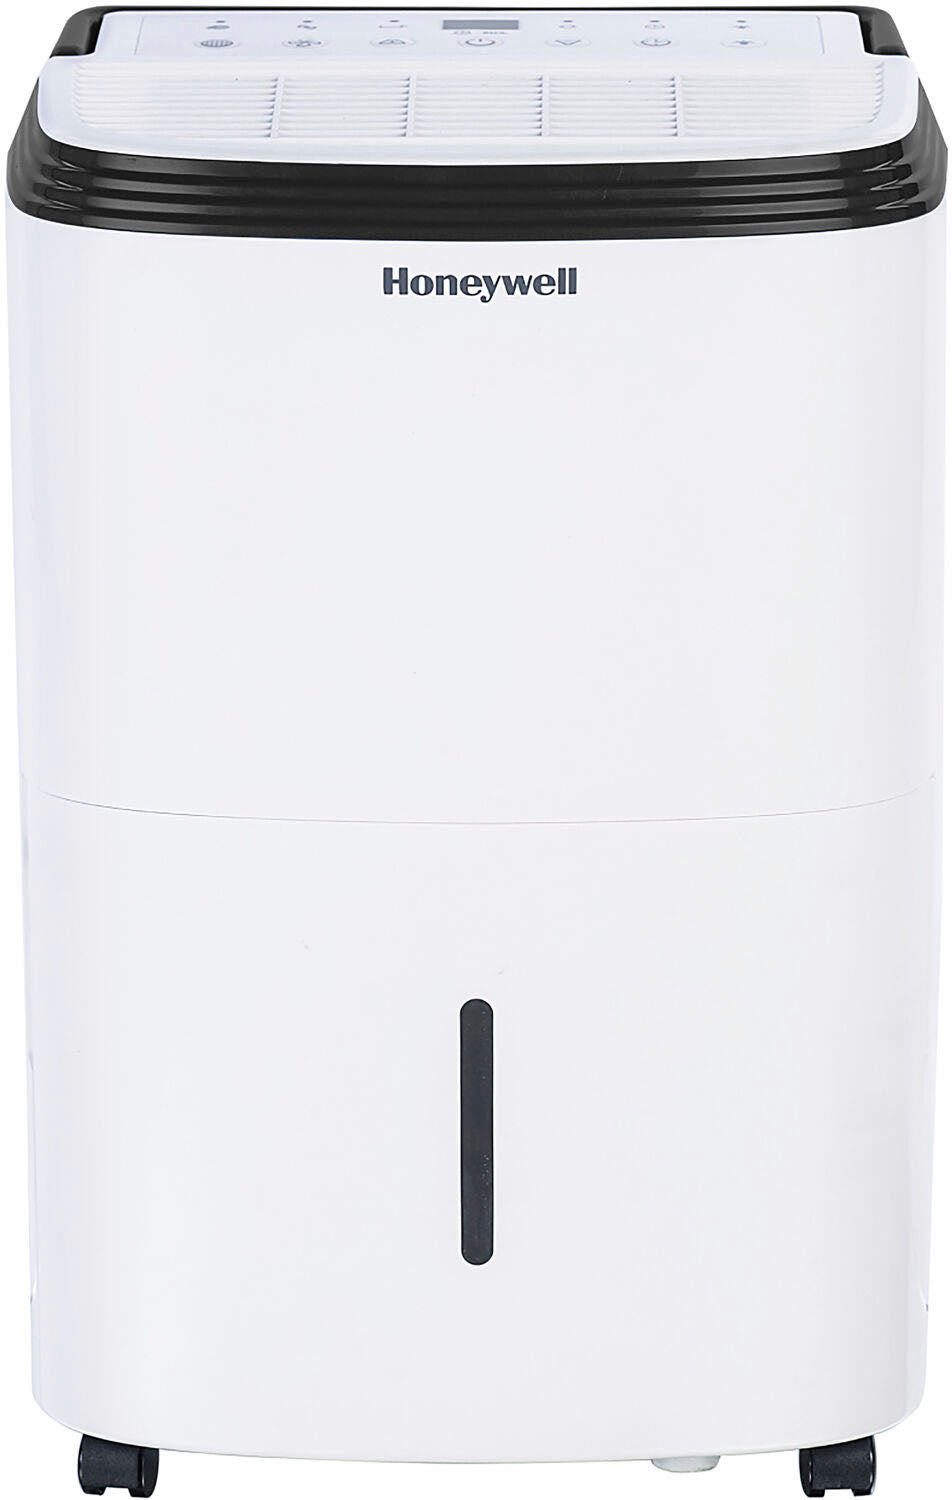 Honeywell - 70 pint Smart Wi-Fi Energy Star Dehumidifier for Basement & Large Room Up to 4000 Sq. Ft. - White_3